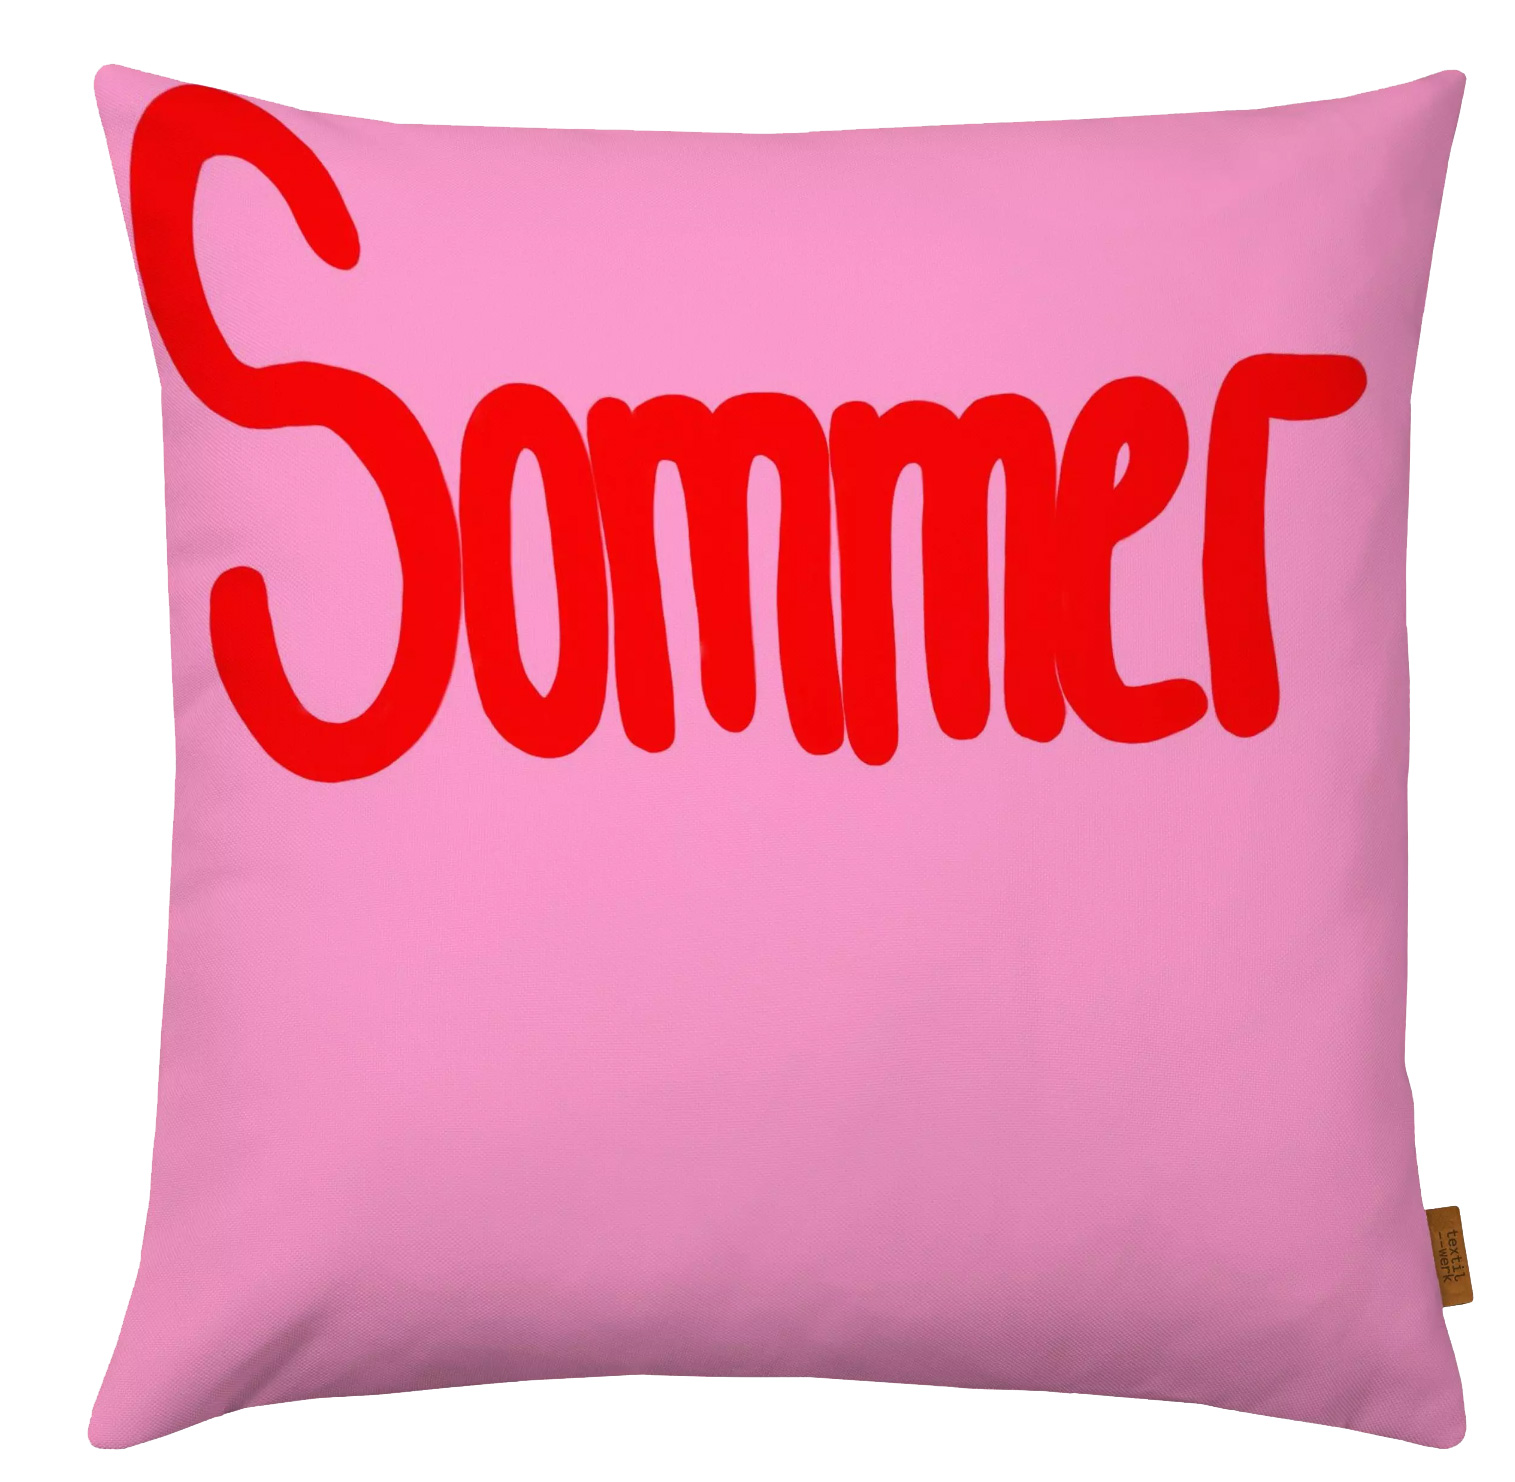 Kissenhülle "Sommer Pinky"  , ca. 40 x 40 cm , Polyester Canvas  